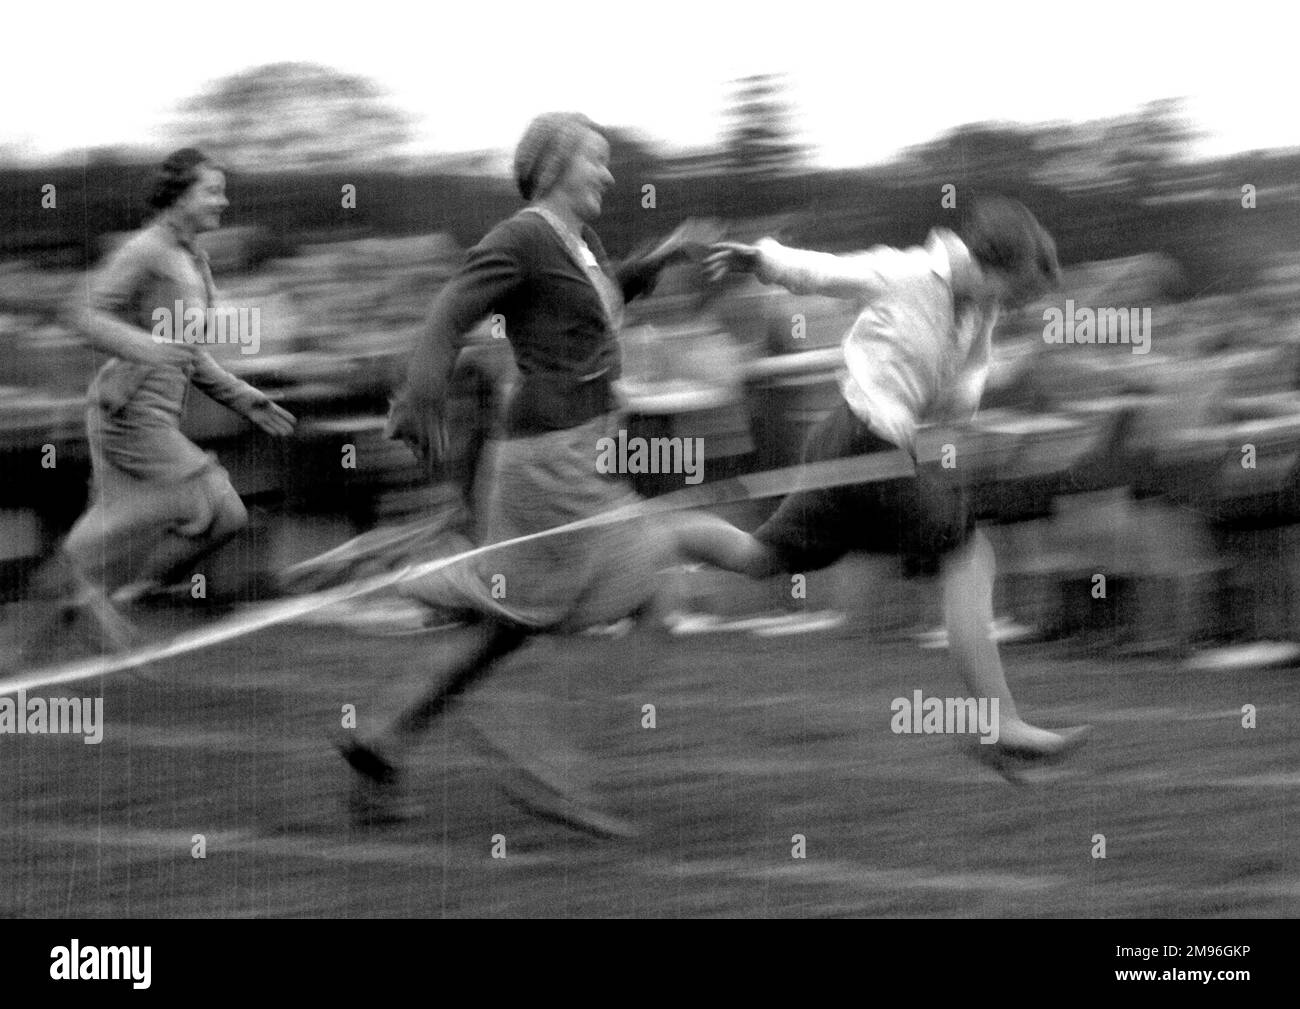 Racing women reach the finishing line in this high-speed action shot. Stock Photo